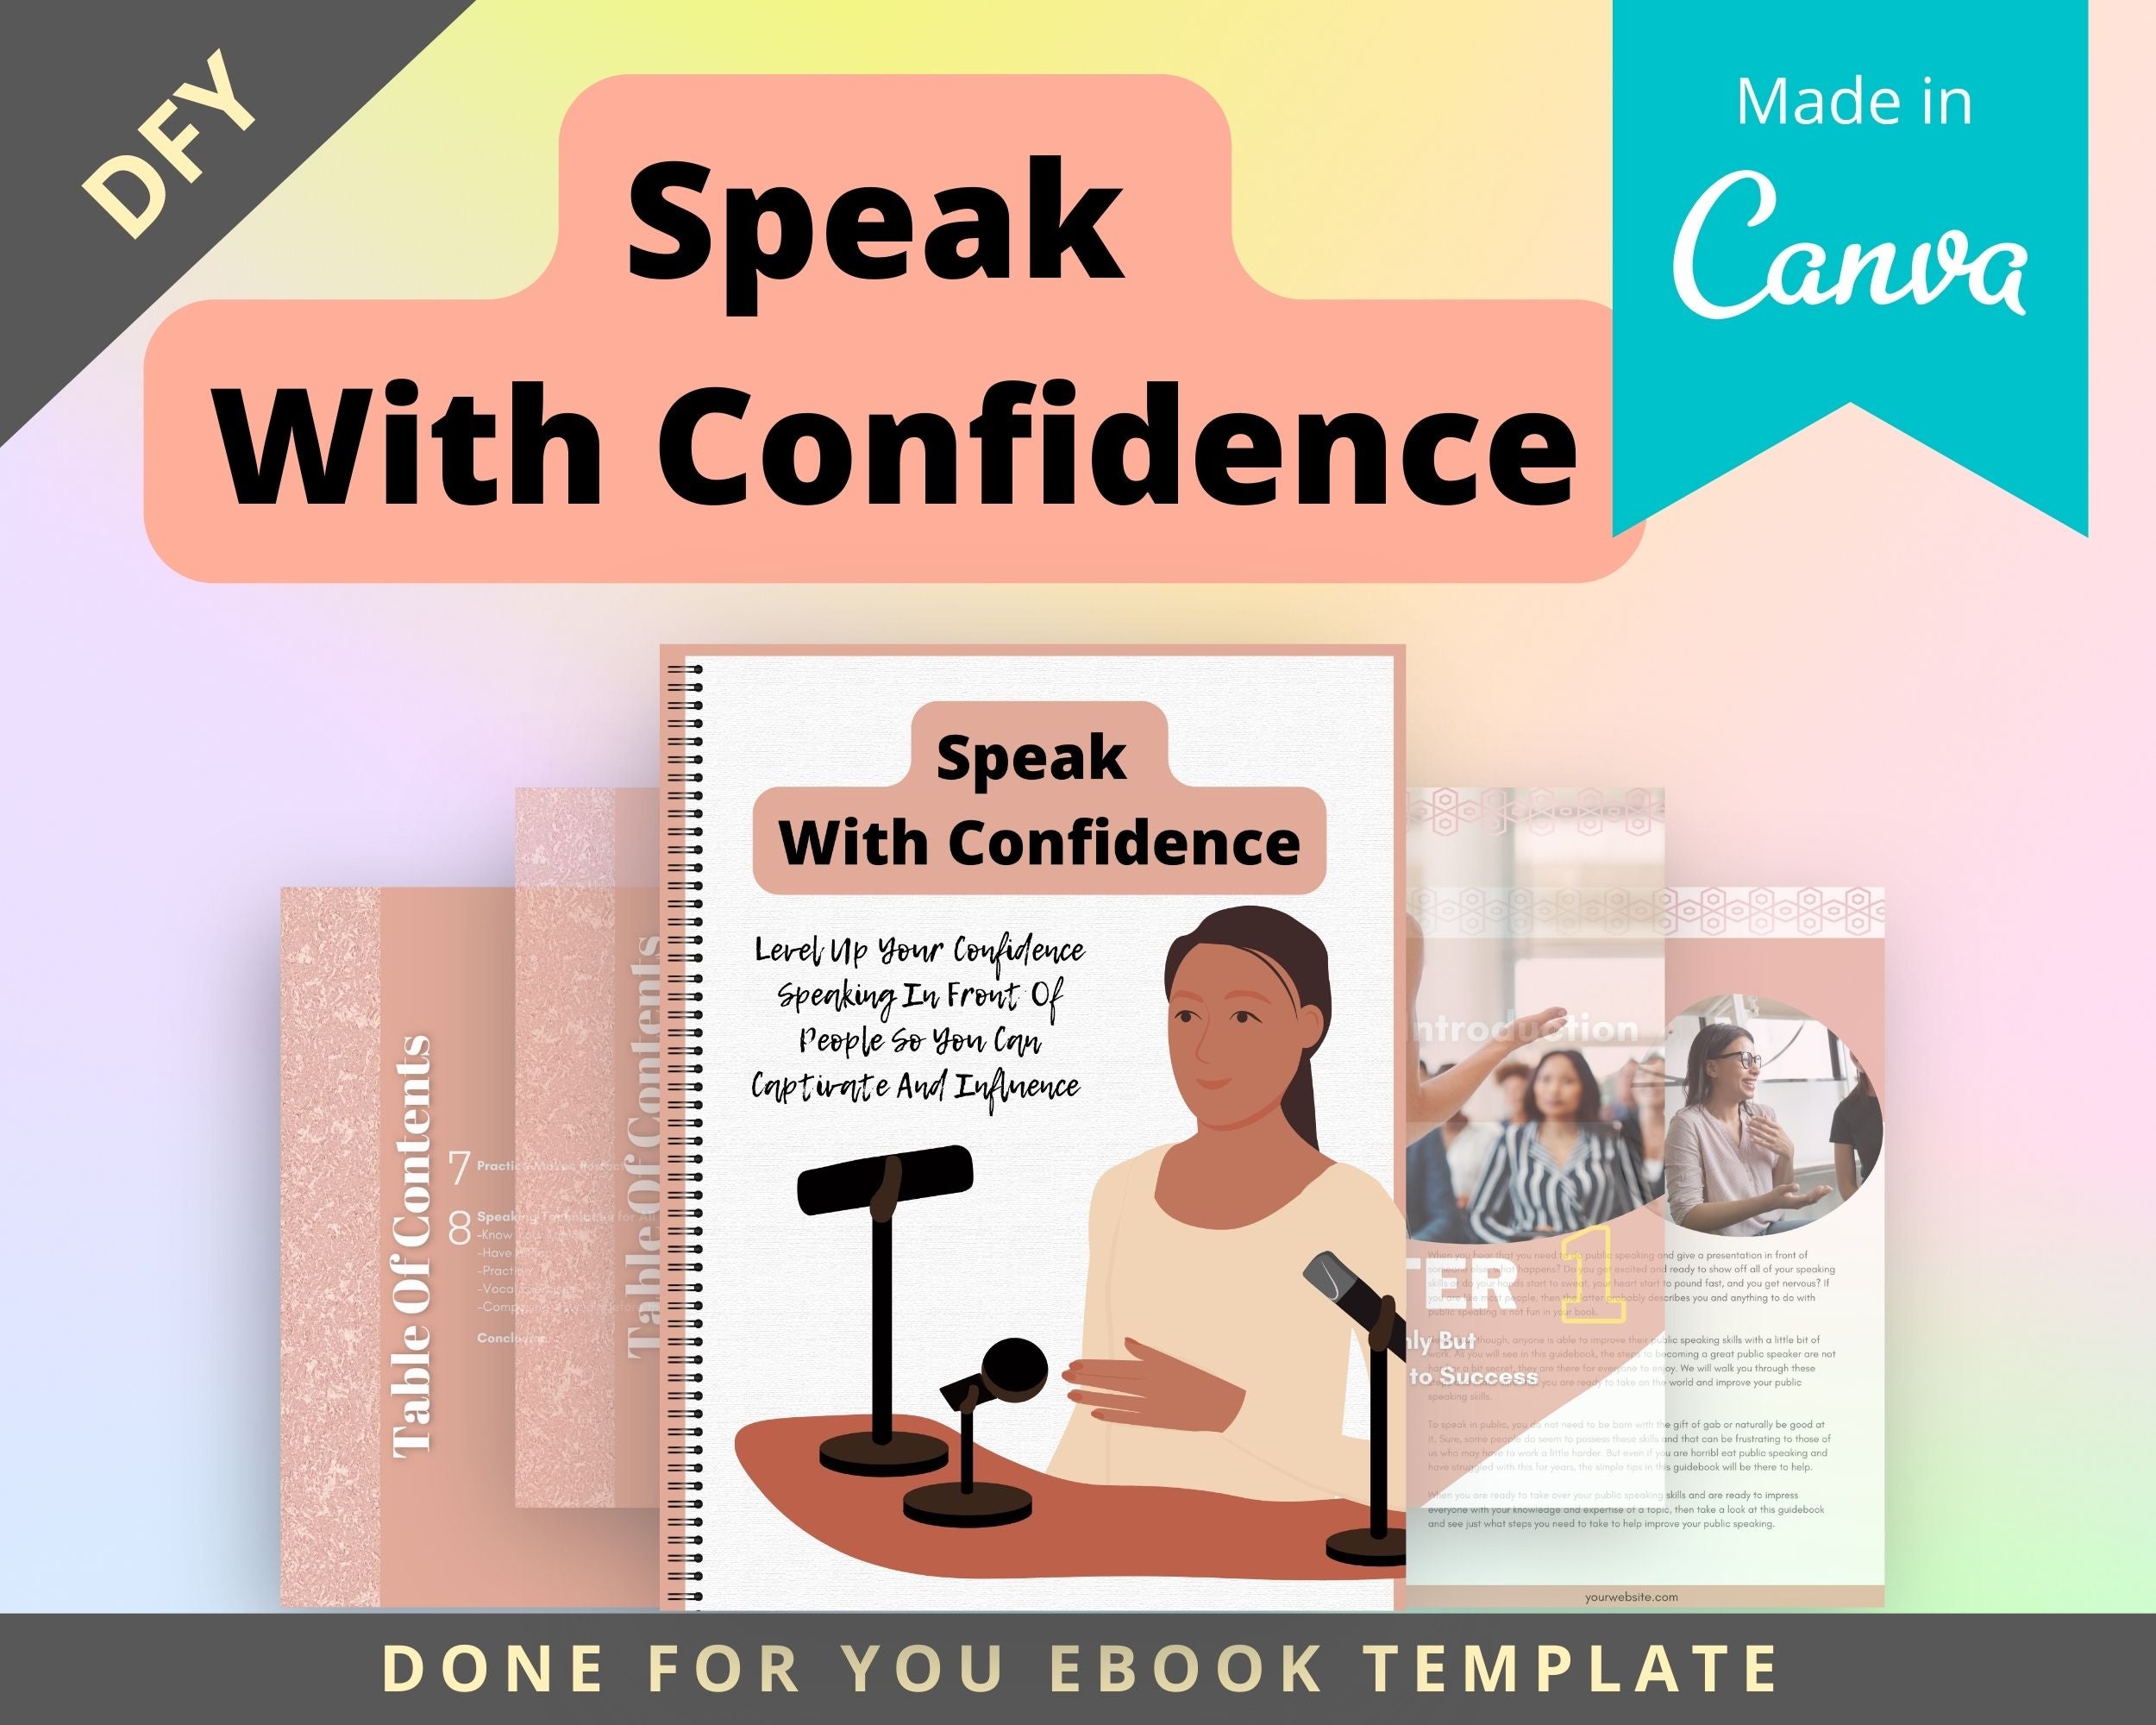 Editable Speak With Confidence Ebook | Done-for-You Ebook in Canva | Rebrandable and Resizable Canva Template